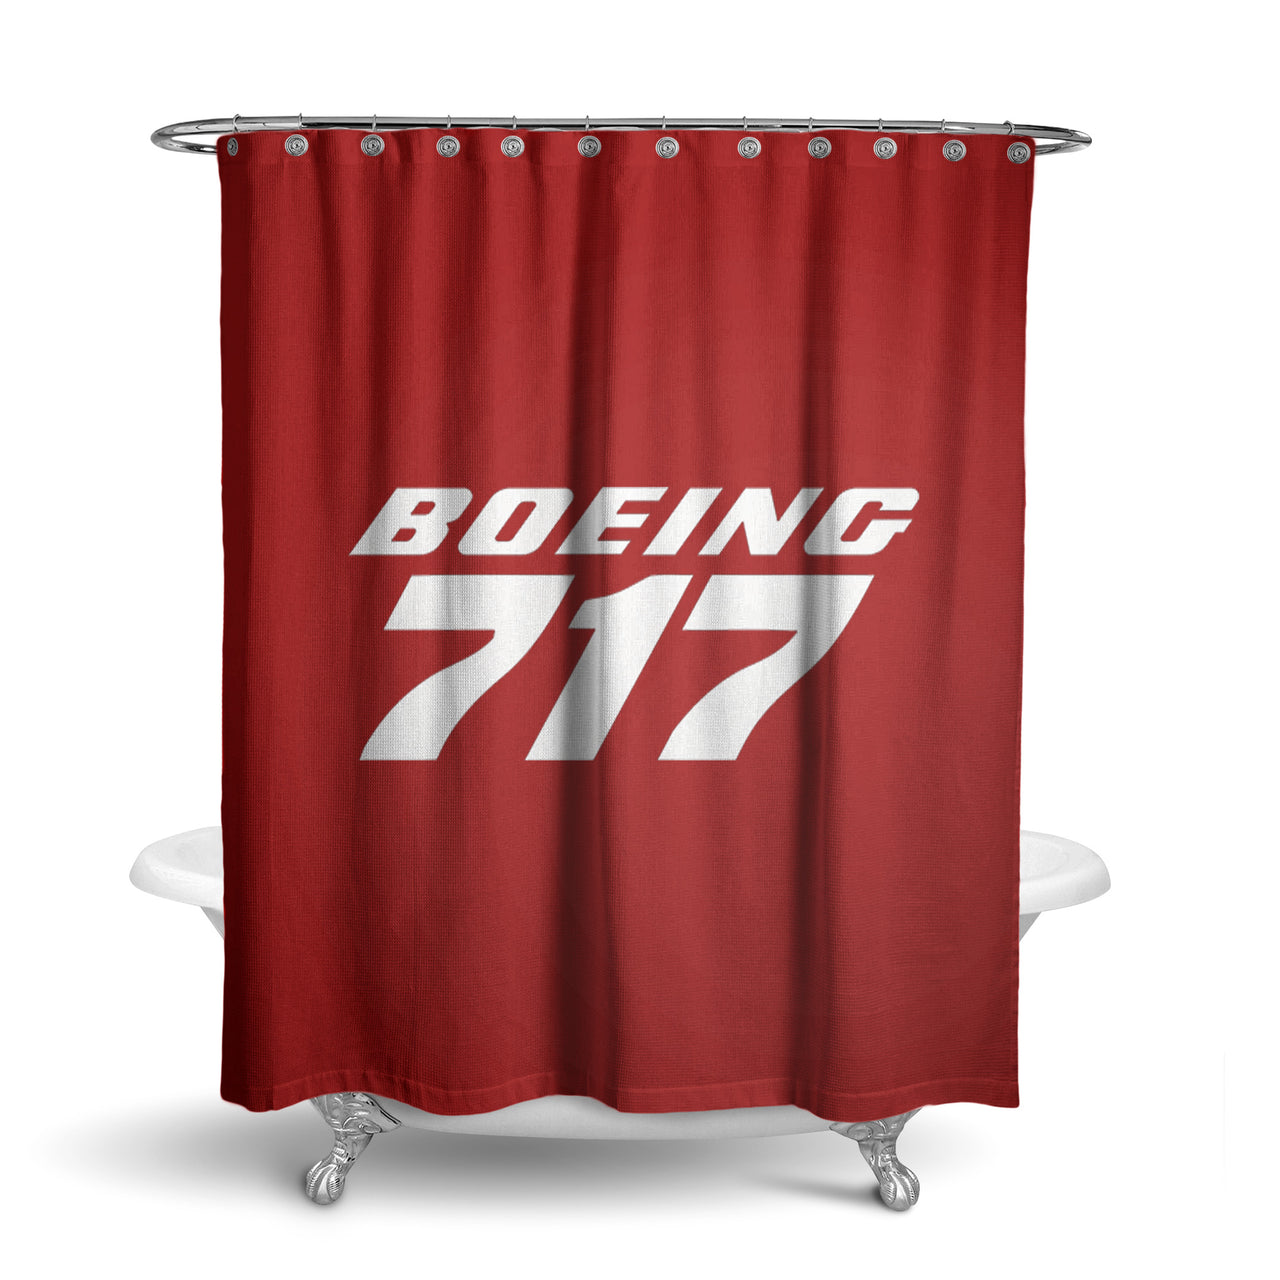 Boeing 717 & Text Designed Shower Curtains